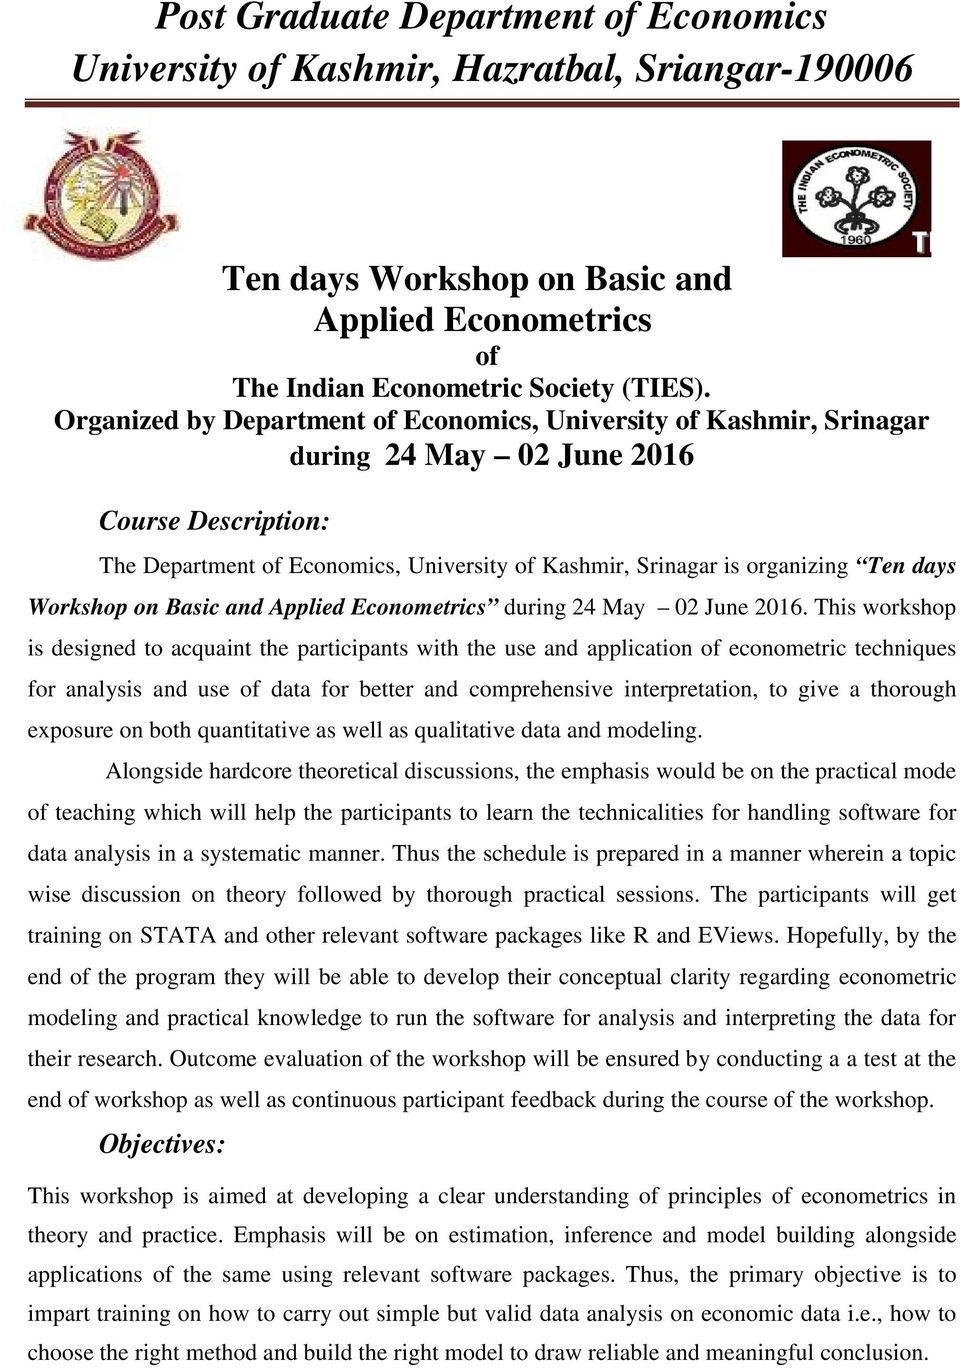 days Workshop on Basic and Applied Econometrics during 24 May 02 June 2016.